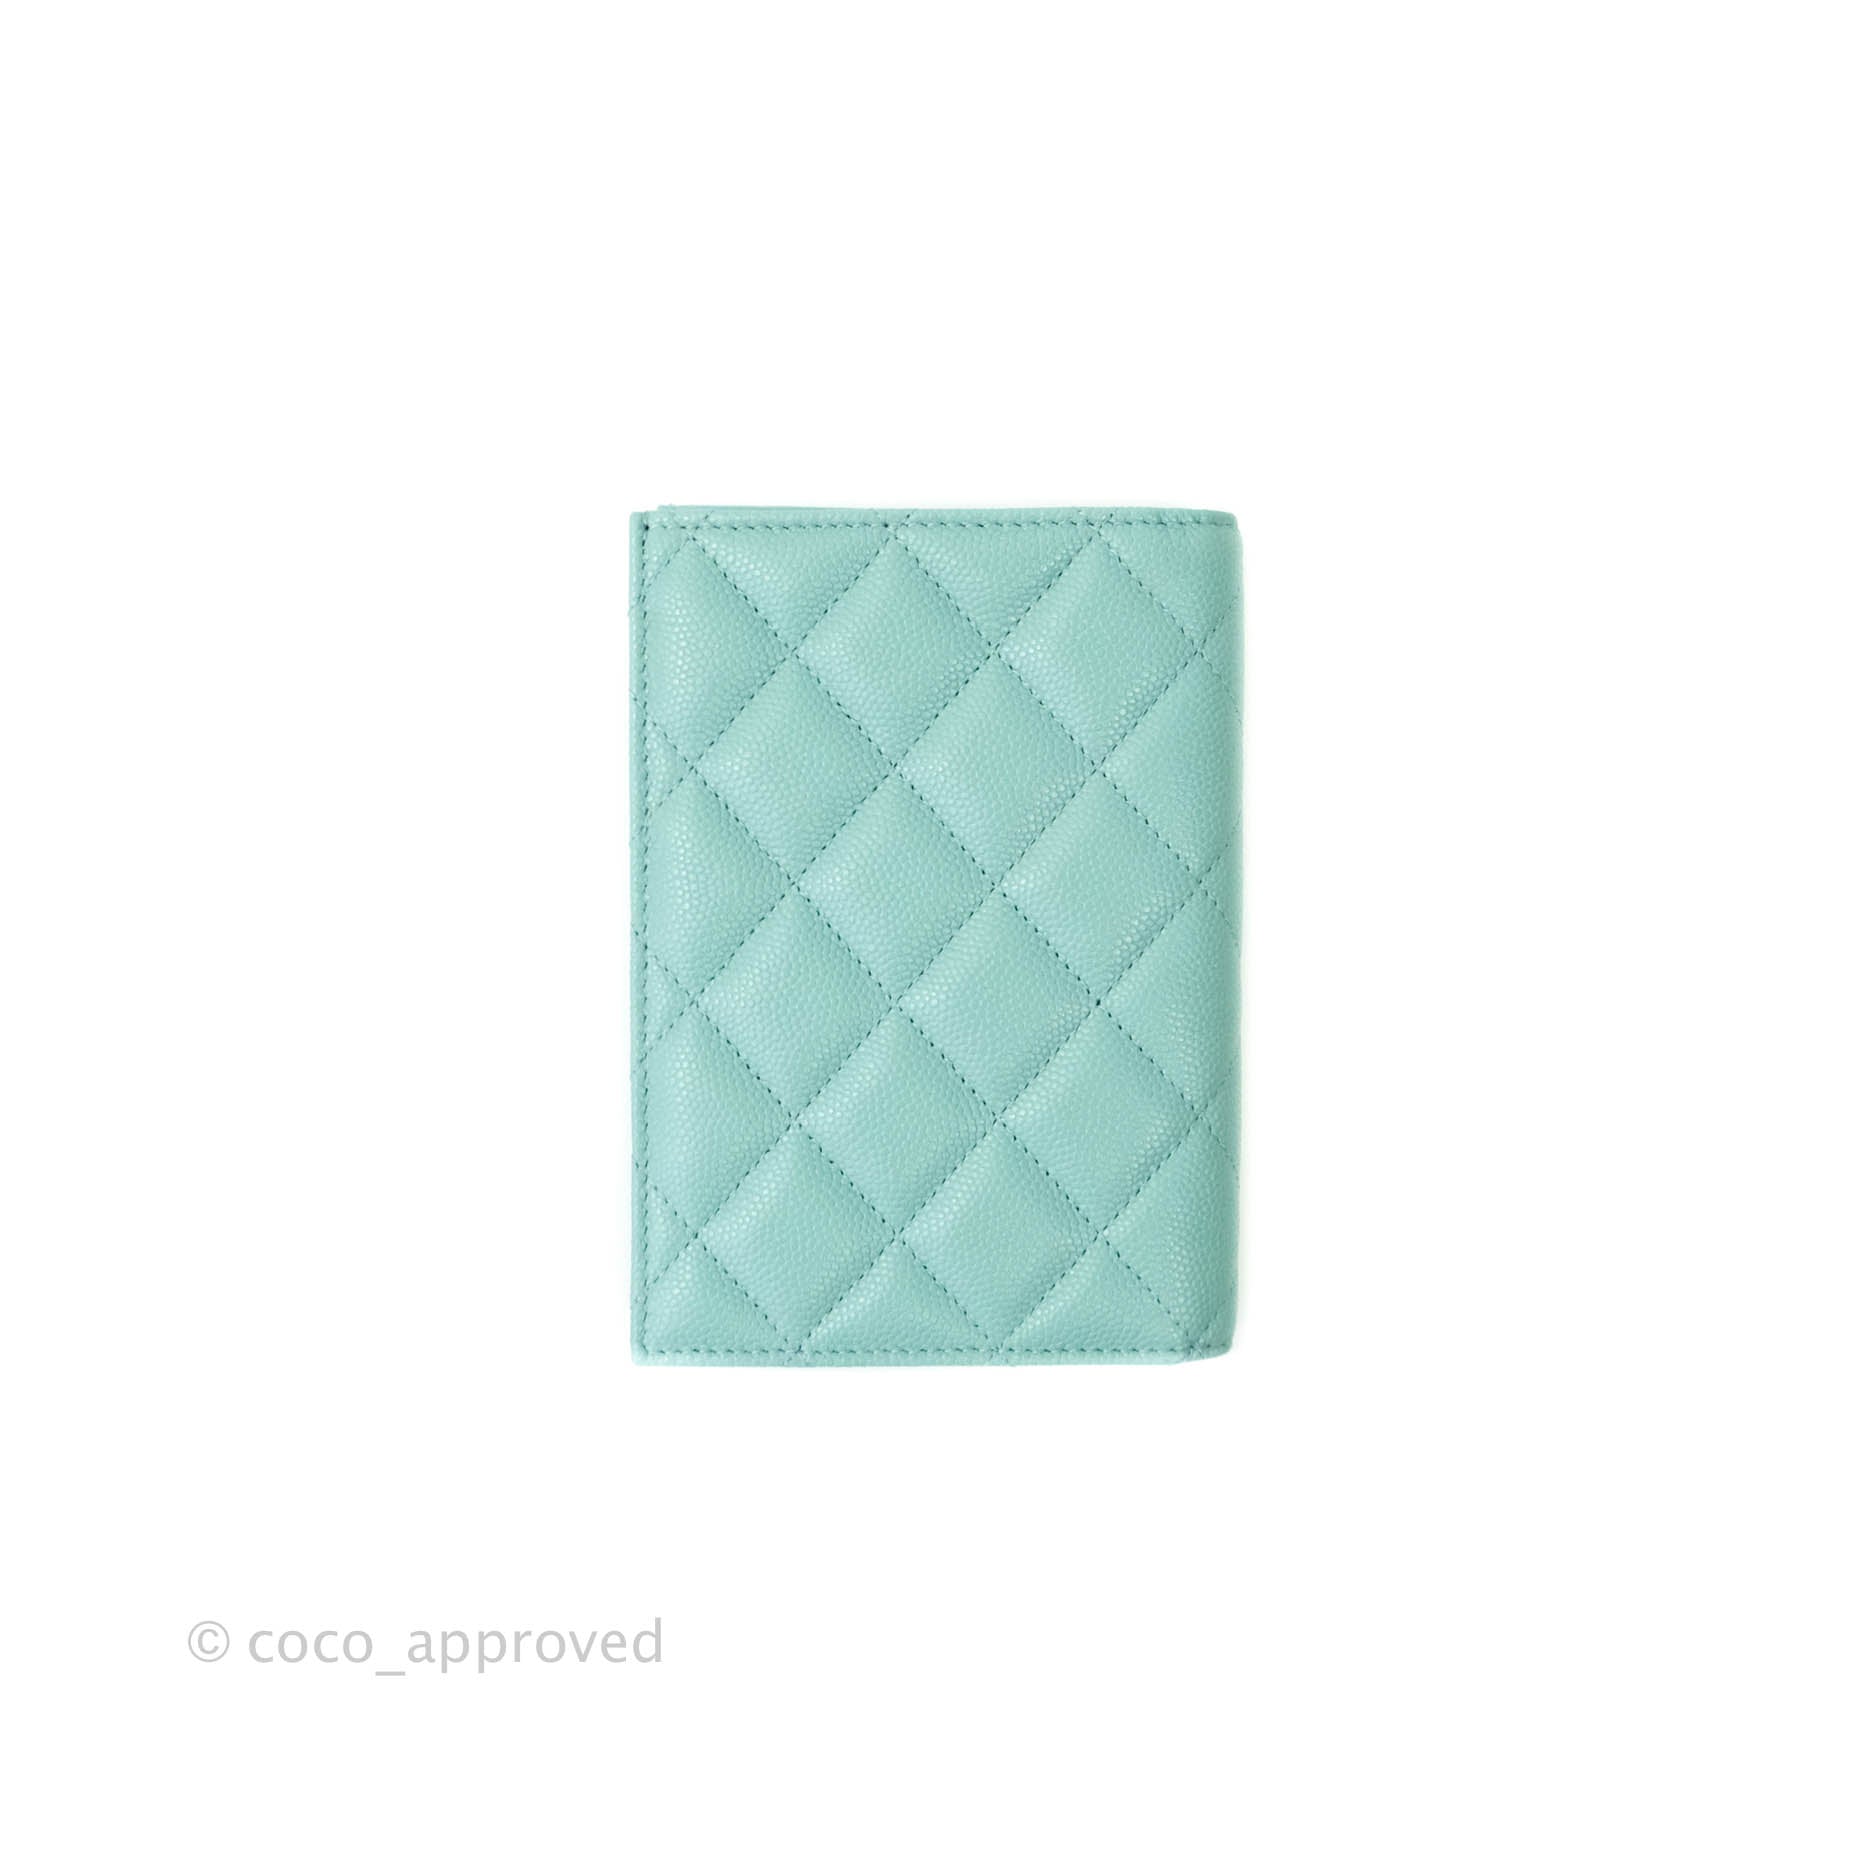 CHANEL, Bags, Authentic Vintage Chanel Quilted Caviar Checkbook  Coverpassport Holder With Ghw